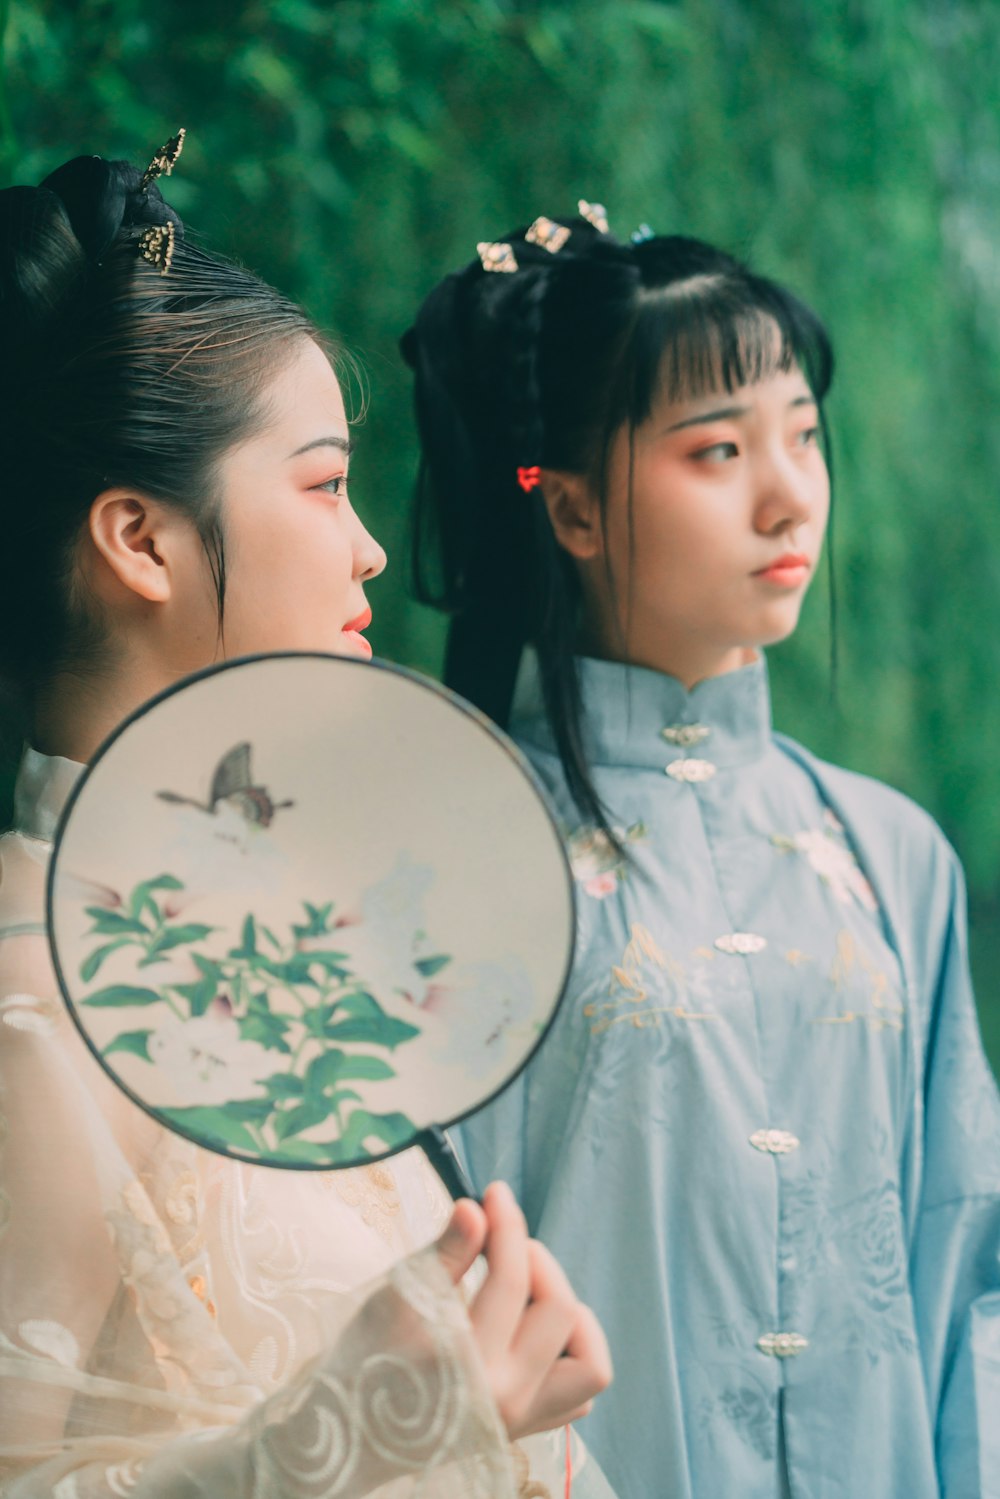 selective focus photography of two women wearing traditional dresses near green trees during daytime